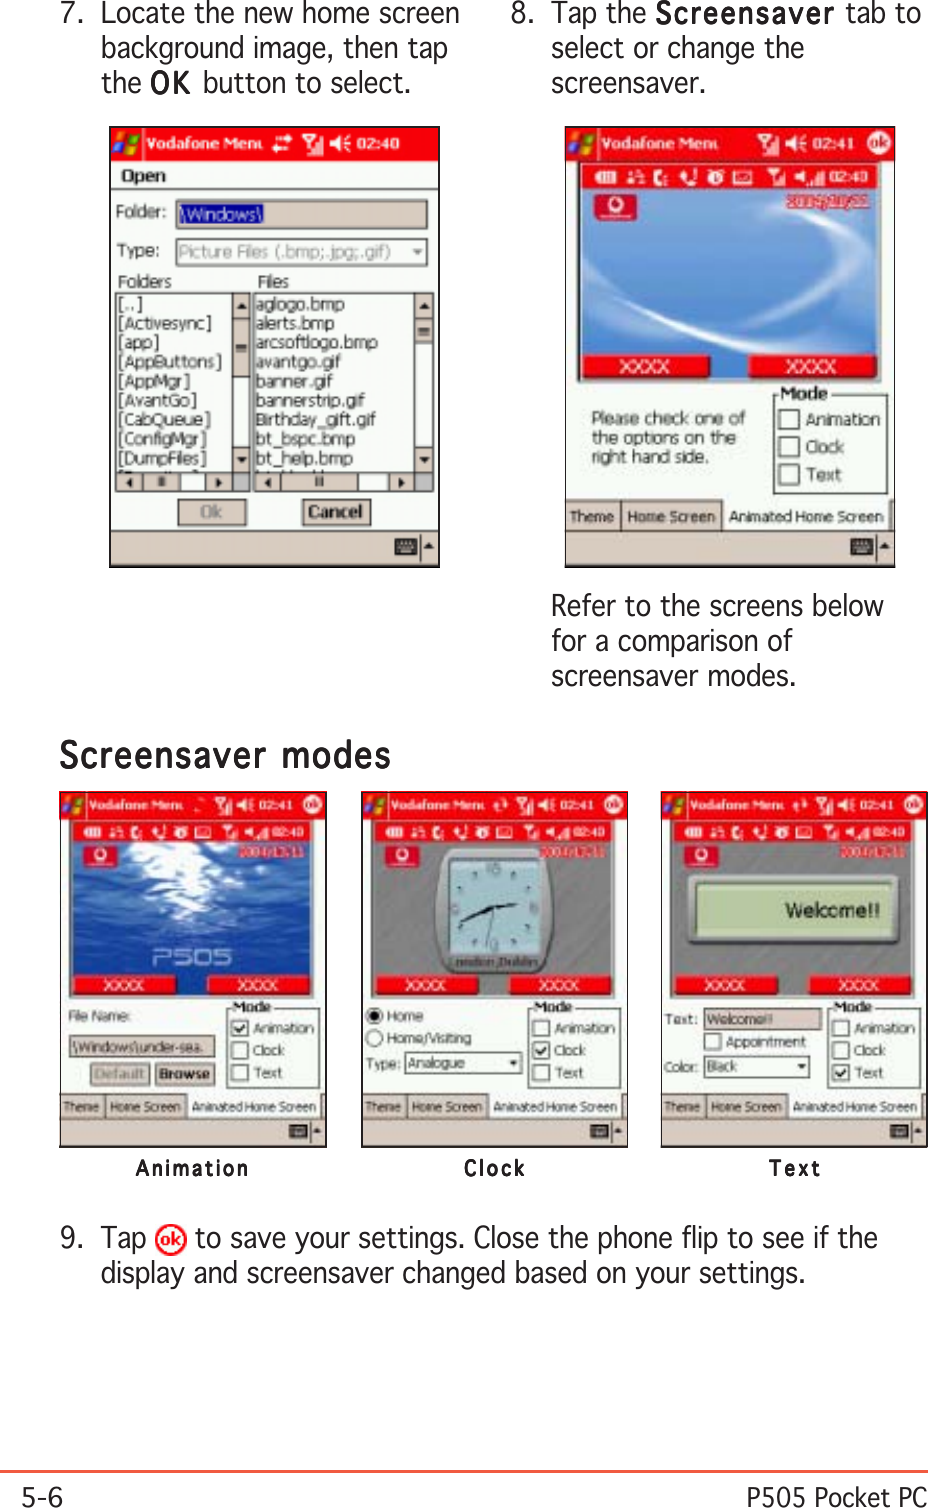 5-6P505 Pocket PC7. Locate the new home screenbackground image, then tapthe OKOKOKOKO K  button to select.8. Tap the ScreensaverScreensaverScreensaverScreensaverScreensaver tab toselect or change thescreensaver.Screensaver modesScreensaver modesScreensaver modesScreensaver modesScreensaver modesAnimationAnimationAnimationAnimationAnimation ClockClockClockClockClock TextTextTextTextText9. Tap   to save your settings. Close the phone flip to see if thedisplay and screensaver changed based on your settings.Refer to the screens belowfor a comparison ofscreensaver modes.